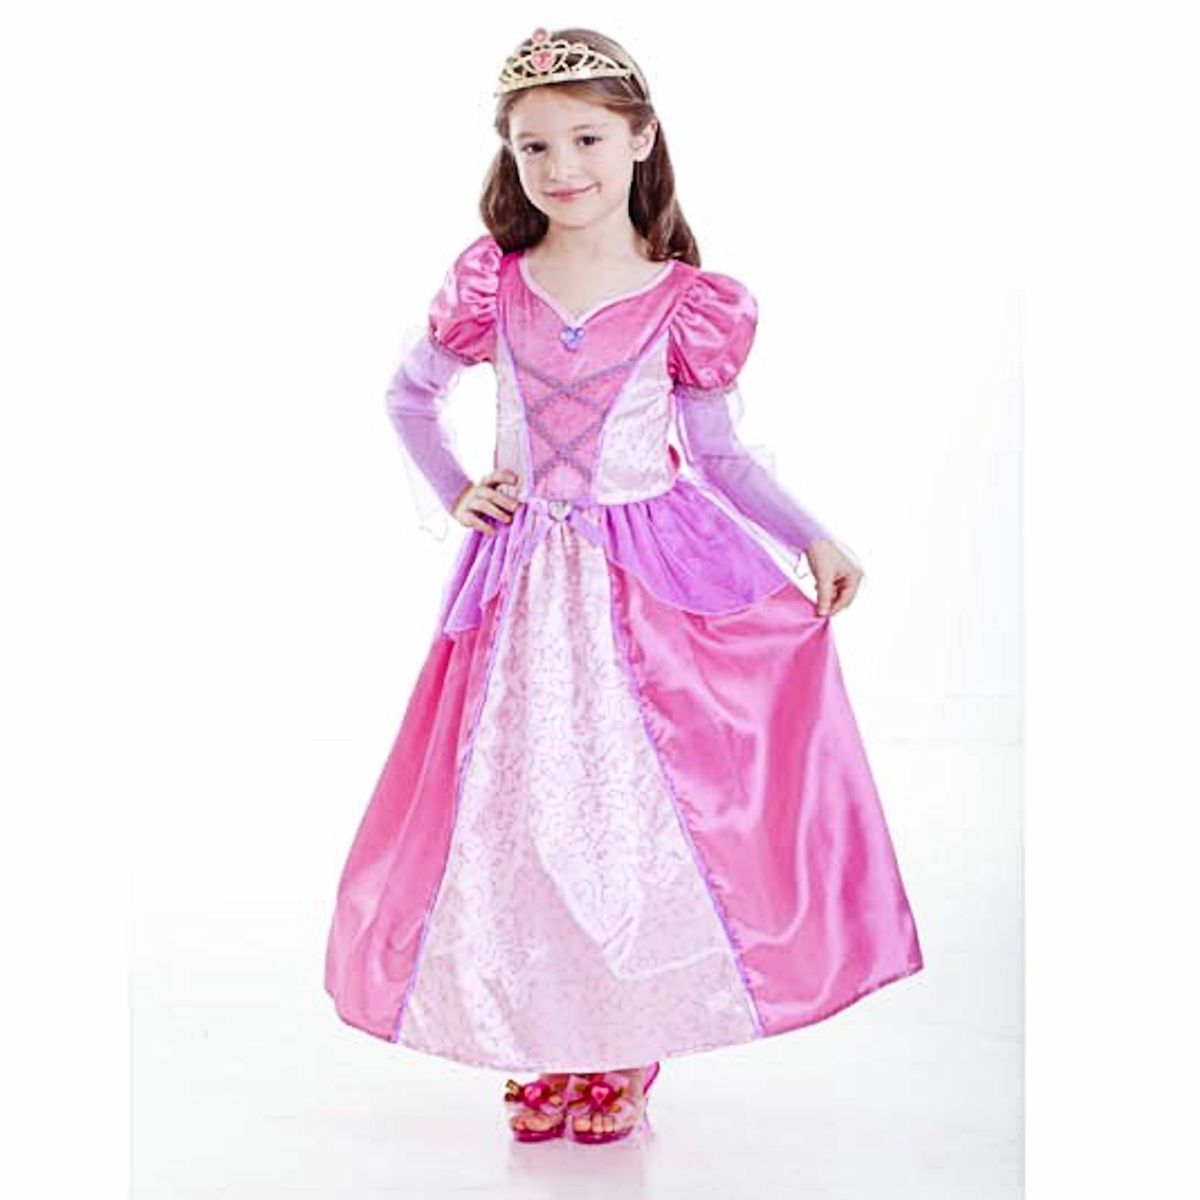 Deluxe Rose Princess Girls Fancy Dress Costume with hooped skirt and gems